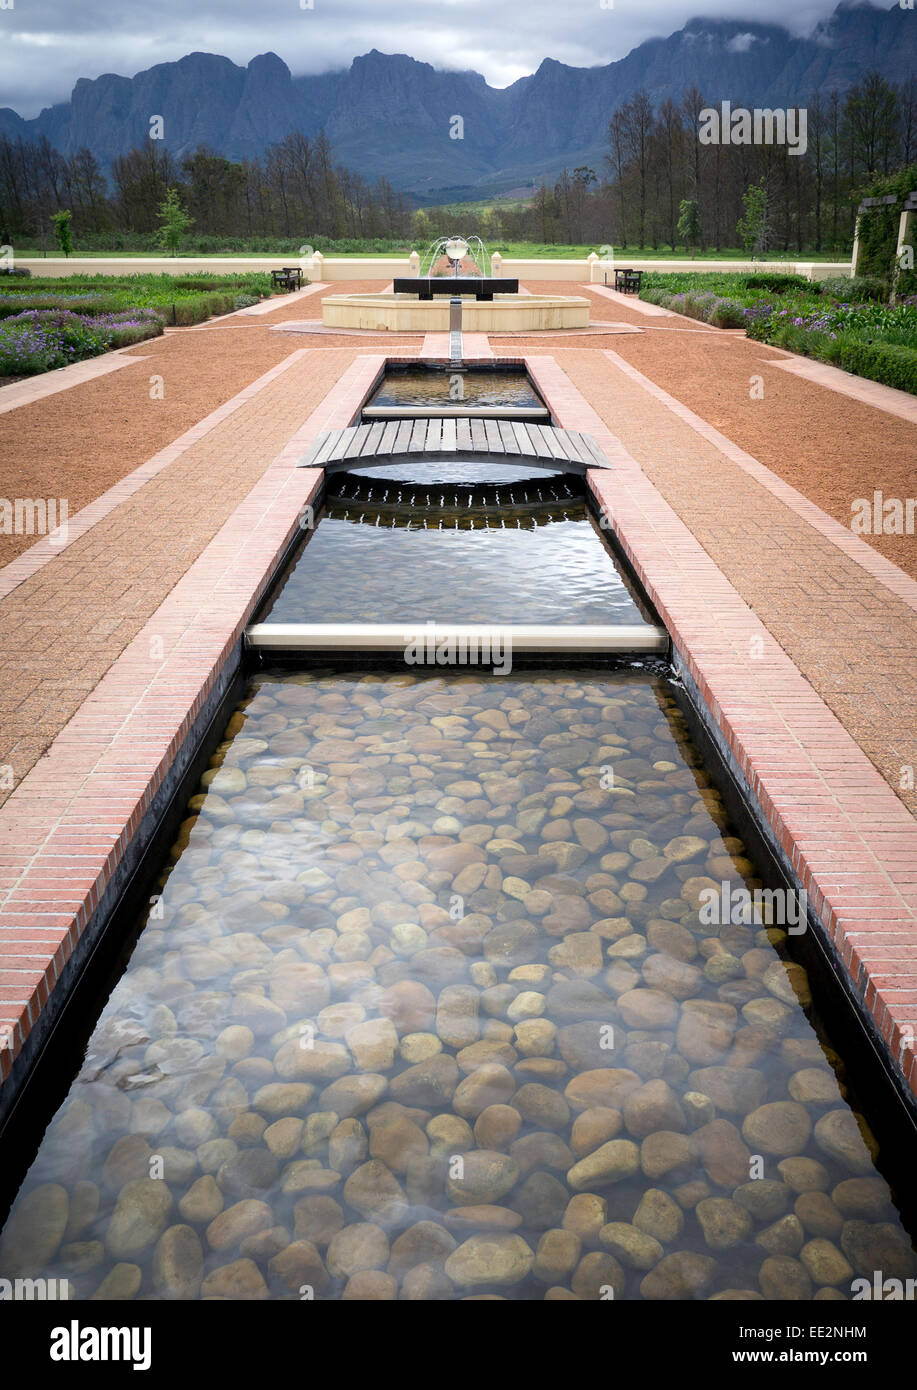 Water features and gardens at the Vergelegen wine estate in the Western Cape, South Africa. Distant Hottentots-Holland mountains Stock Photo